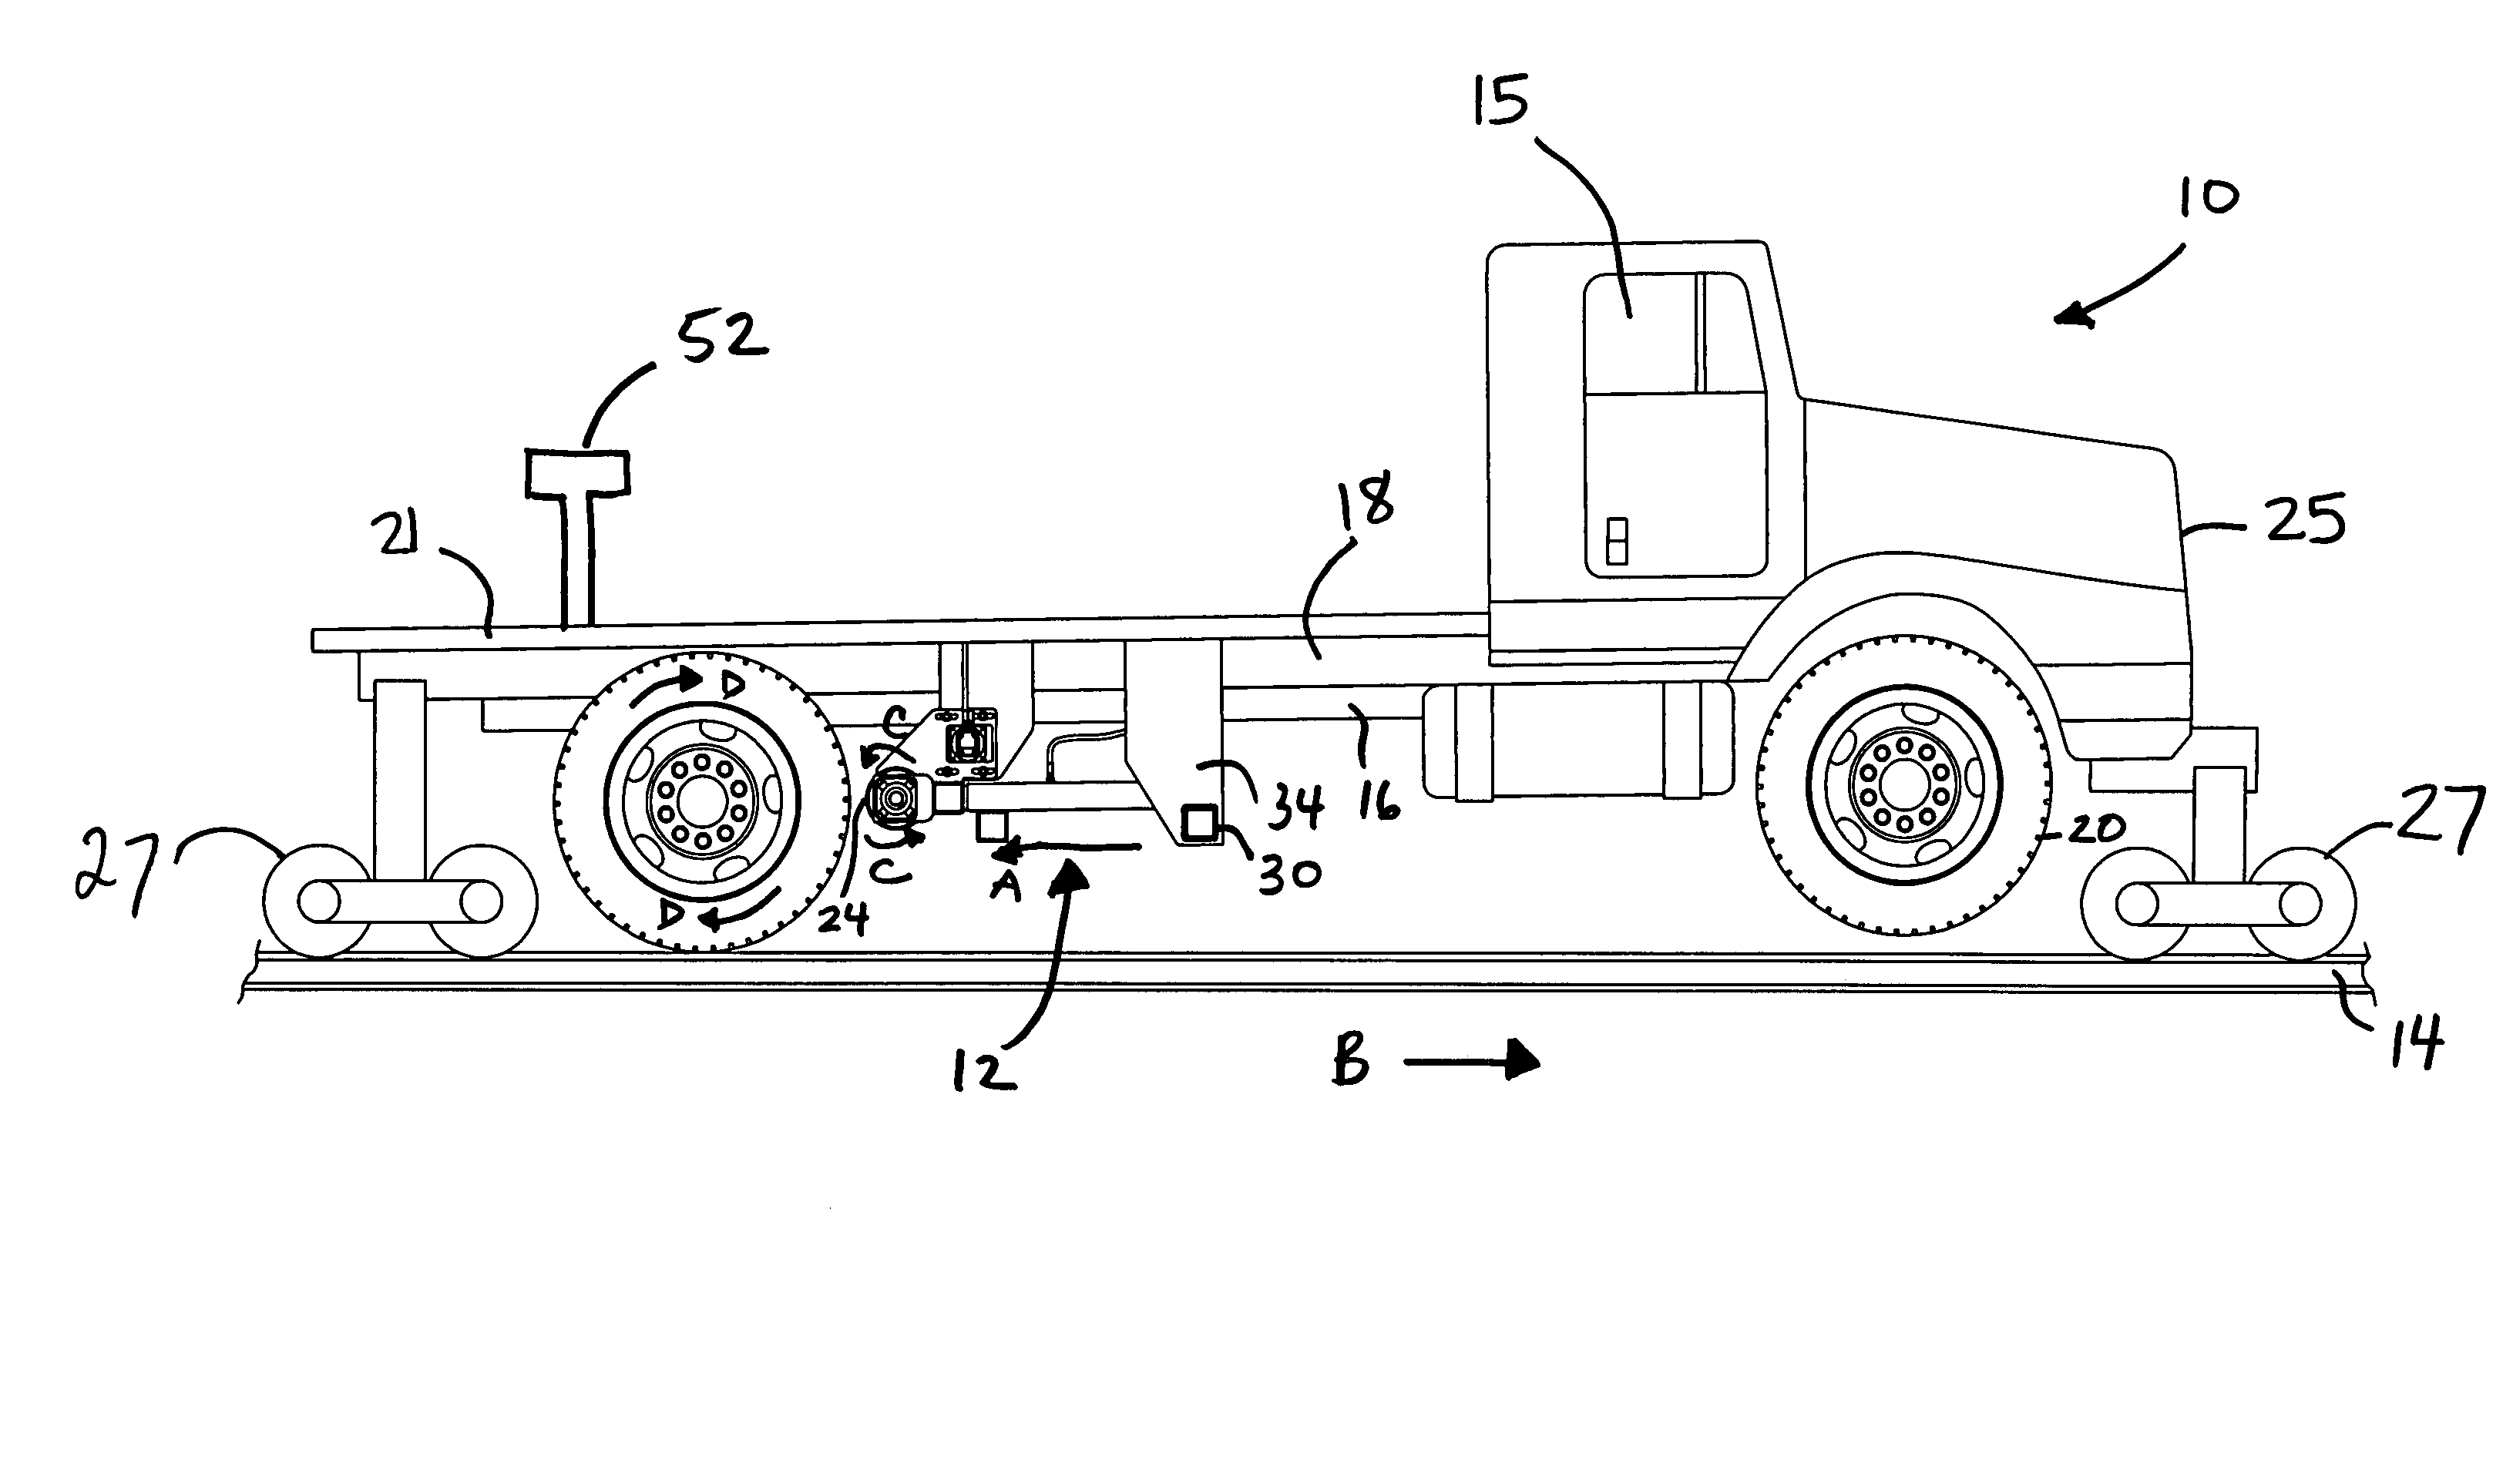 Method and apparatus for operating a vehicle on rails of a railroad track with an auxiliary drive assembly